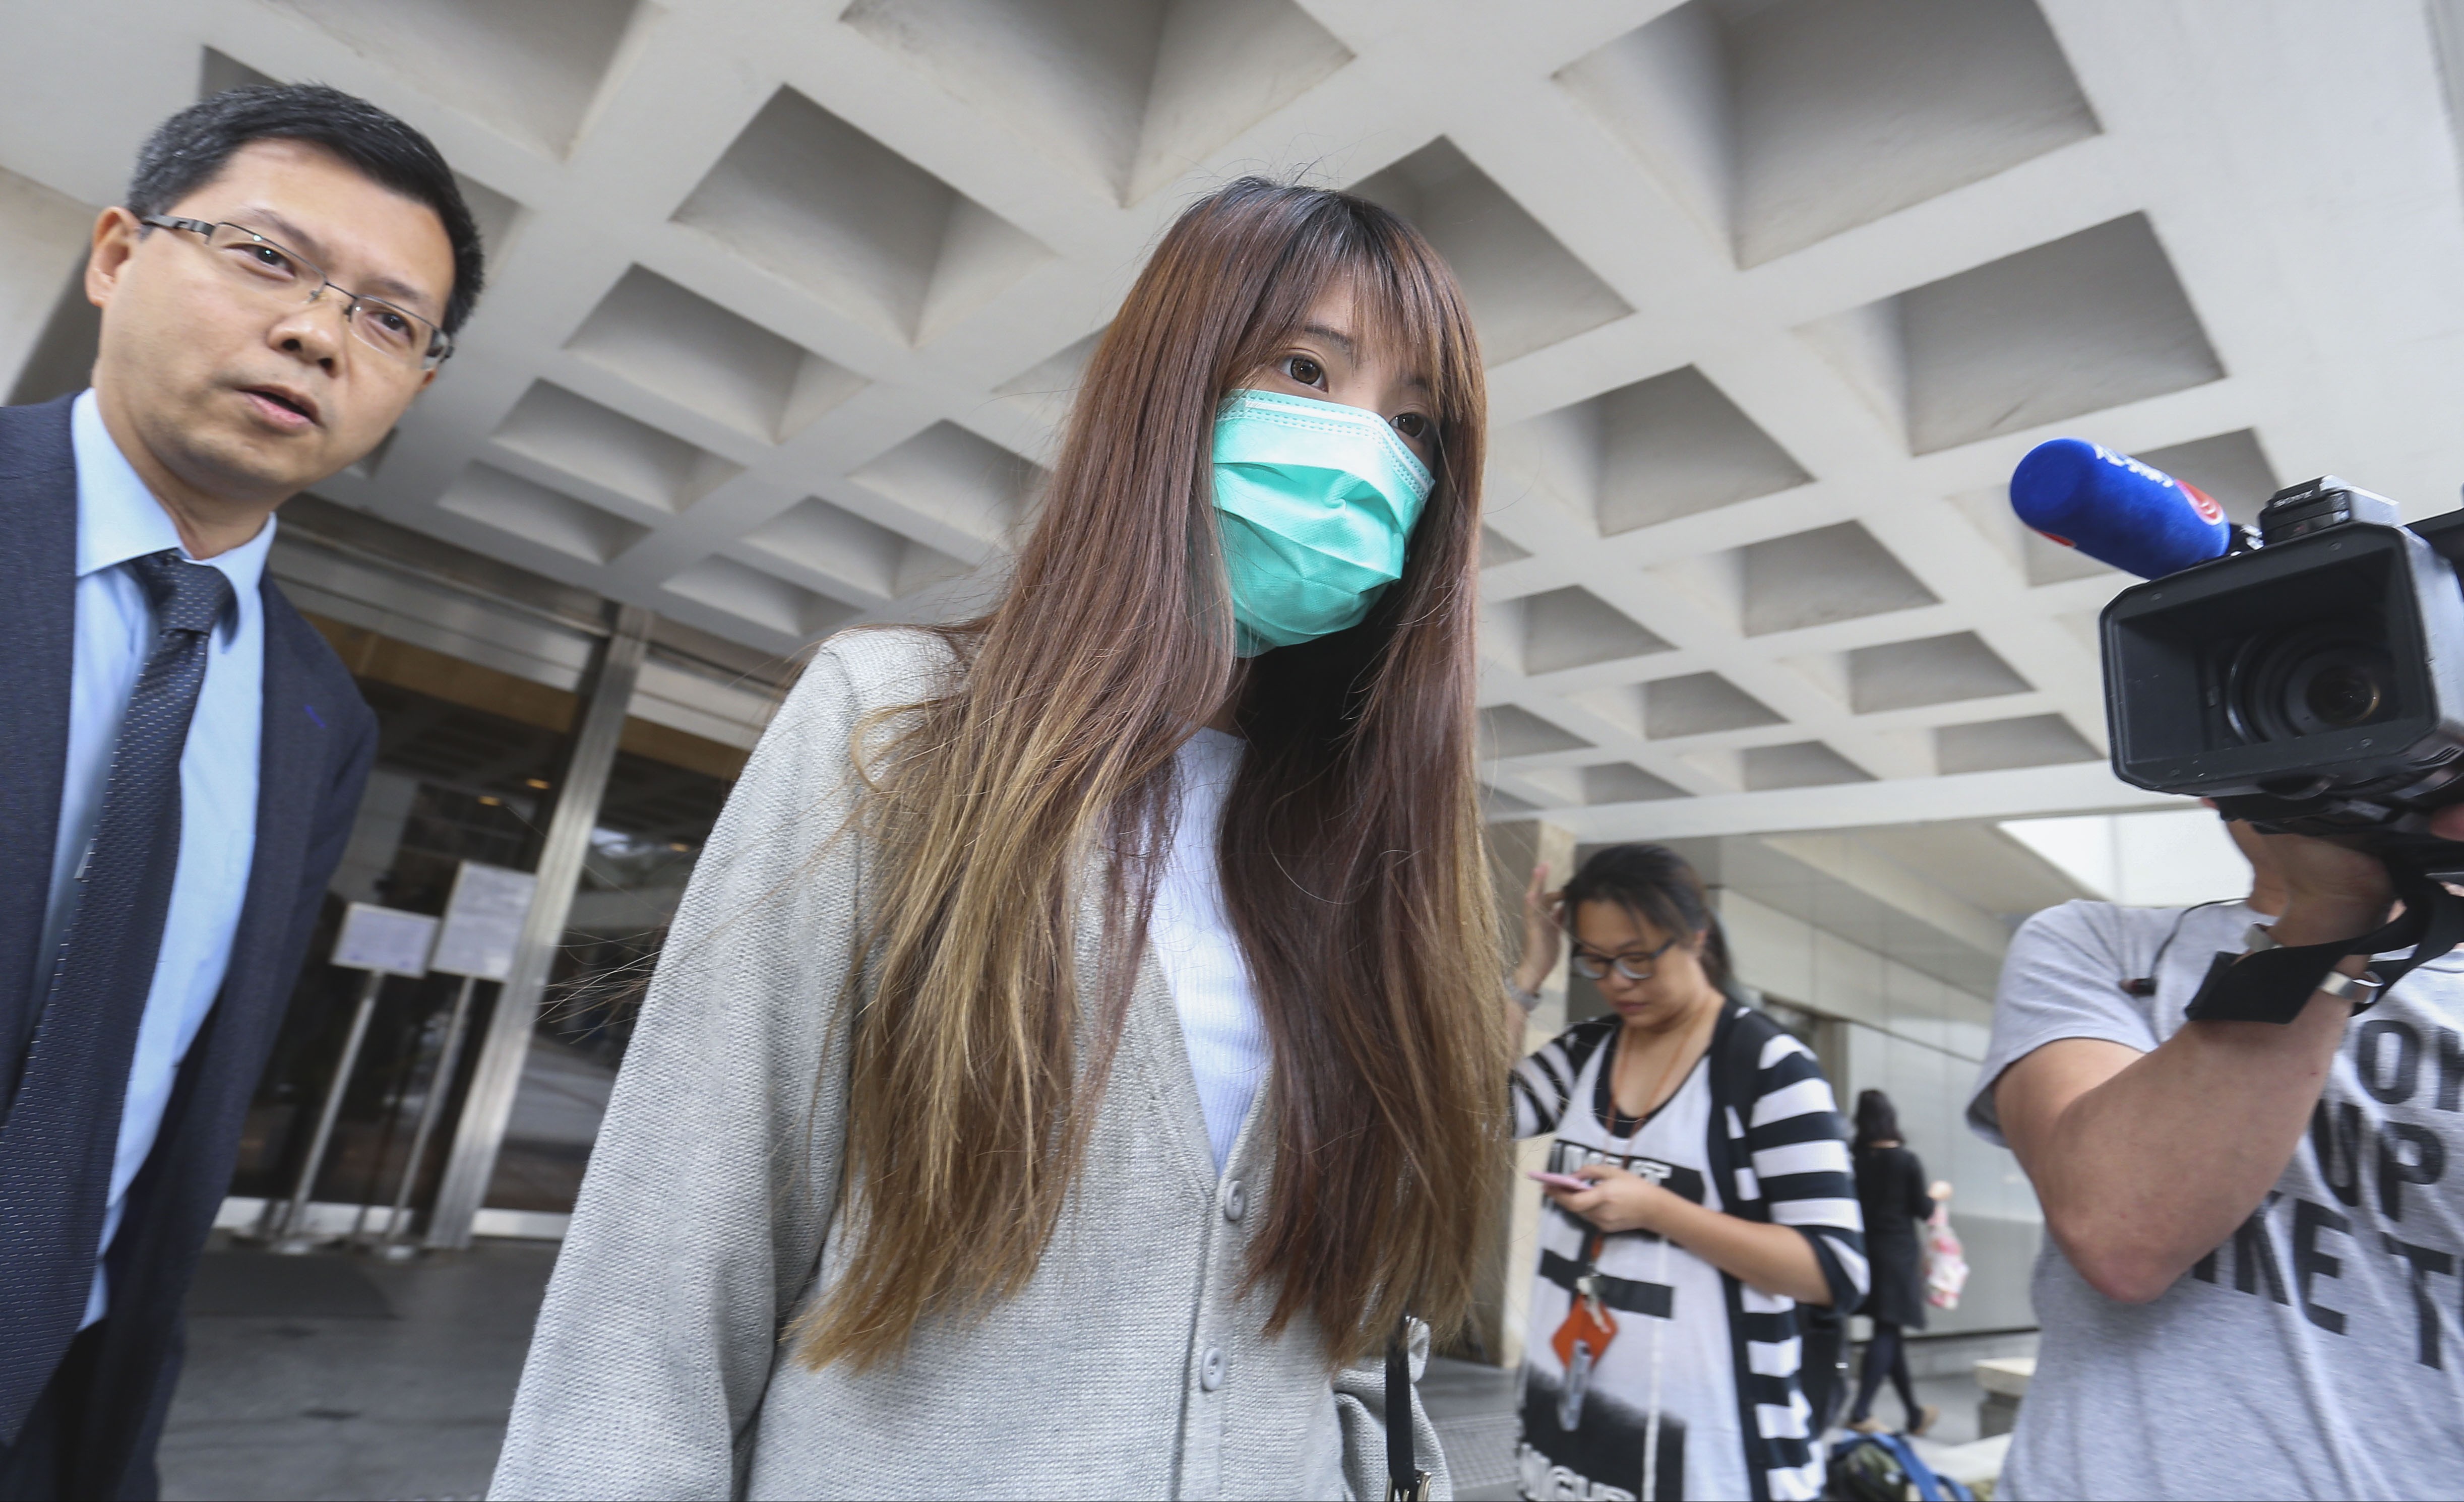 Ho Ling-yu said she was scared the defendants would kill her if she went to the police. Photo: Dickson Lee